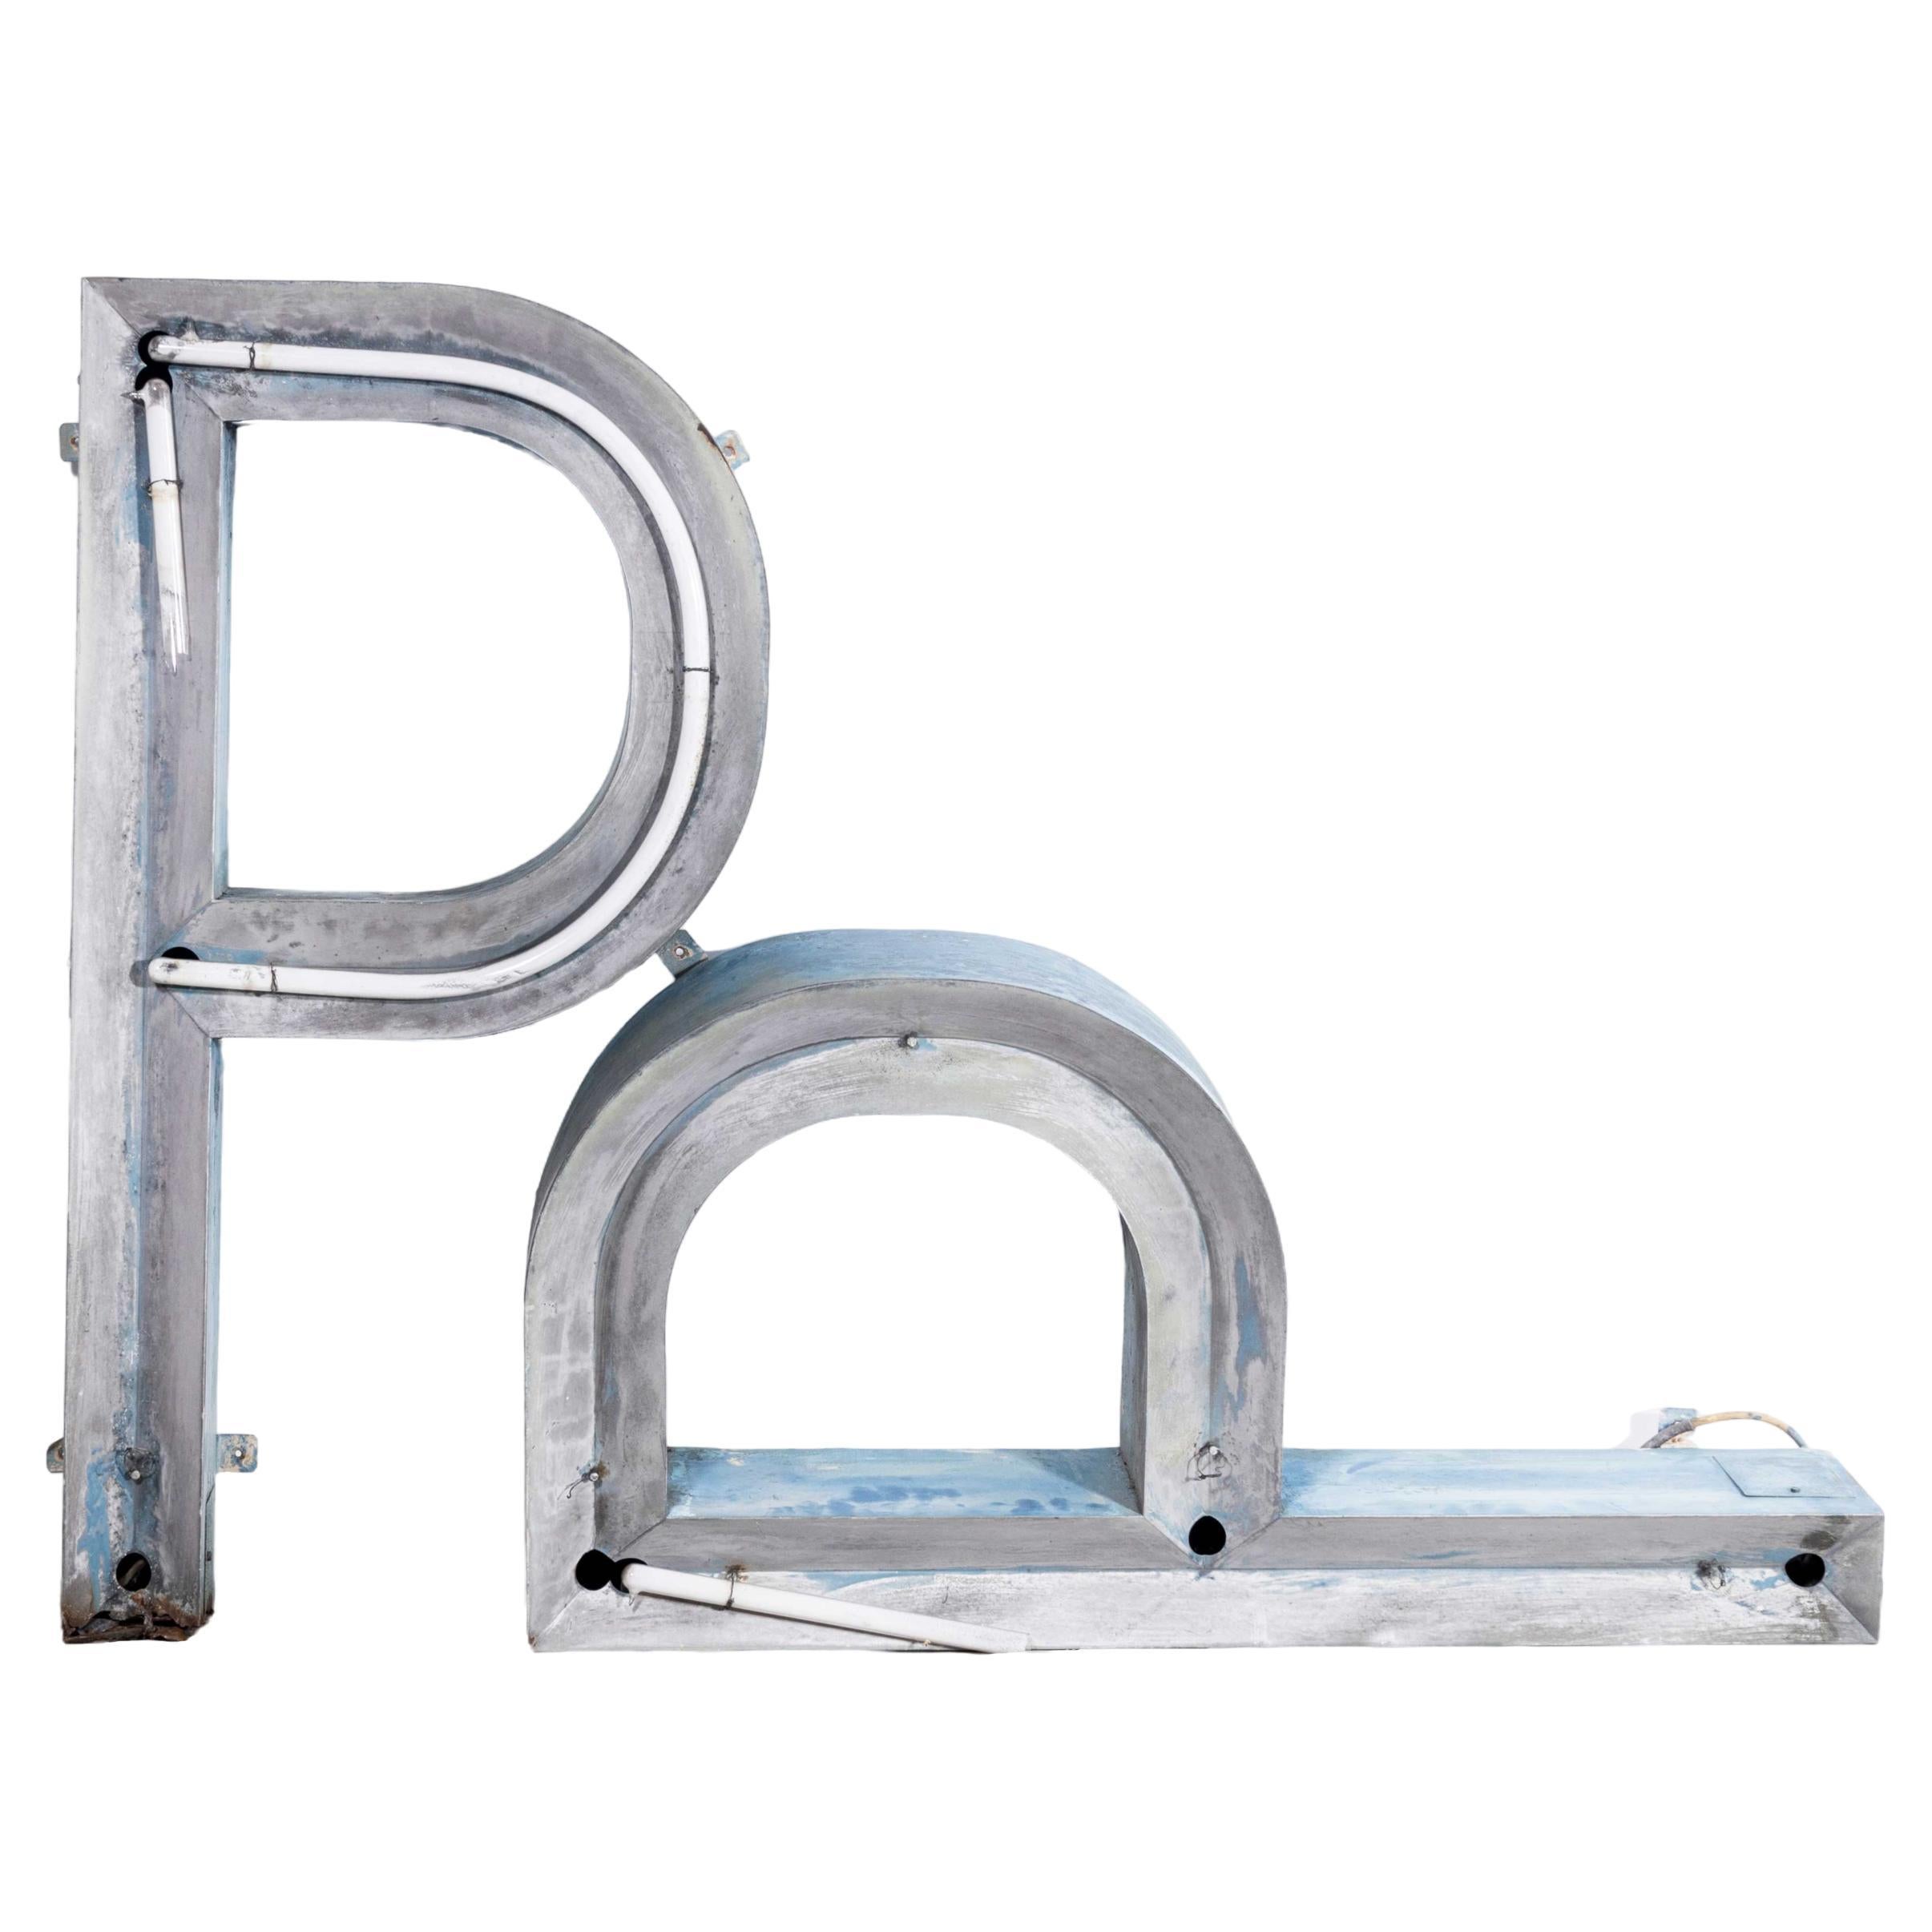 1950's Very Large Original Sign Letter P - One Meter High. For Sale